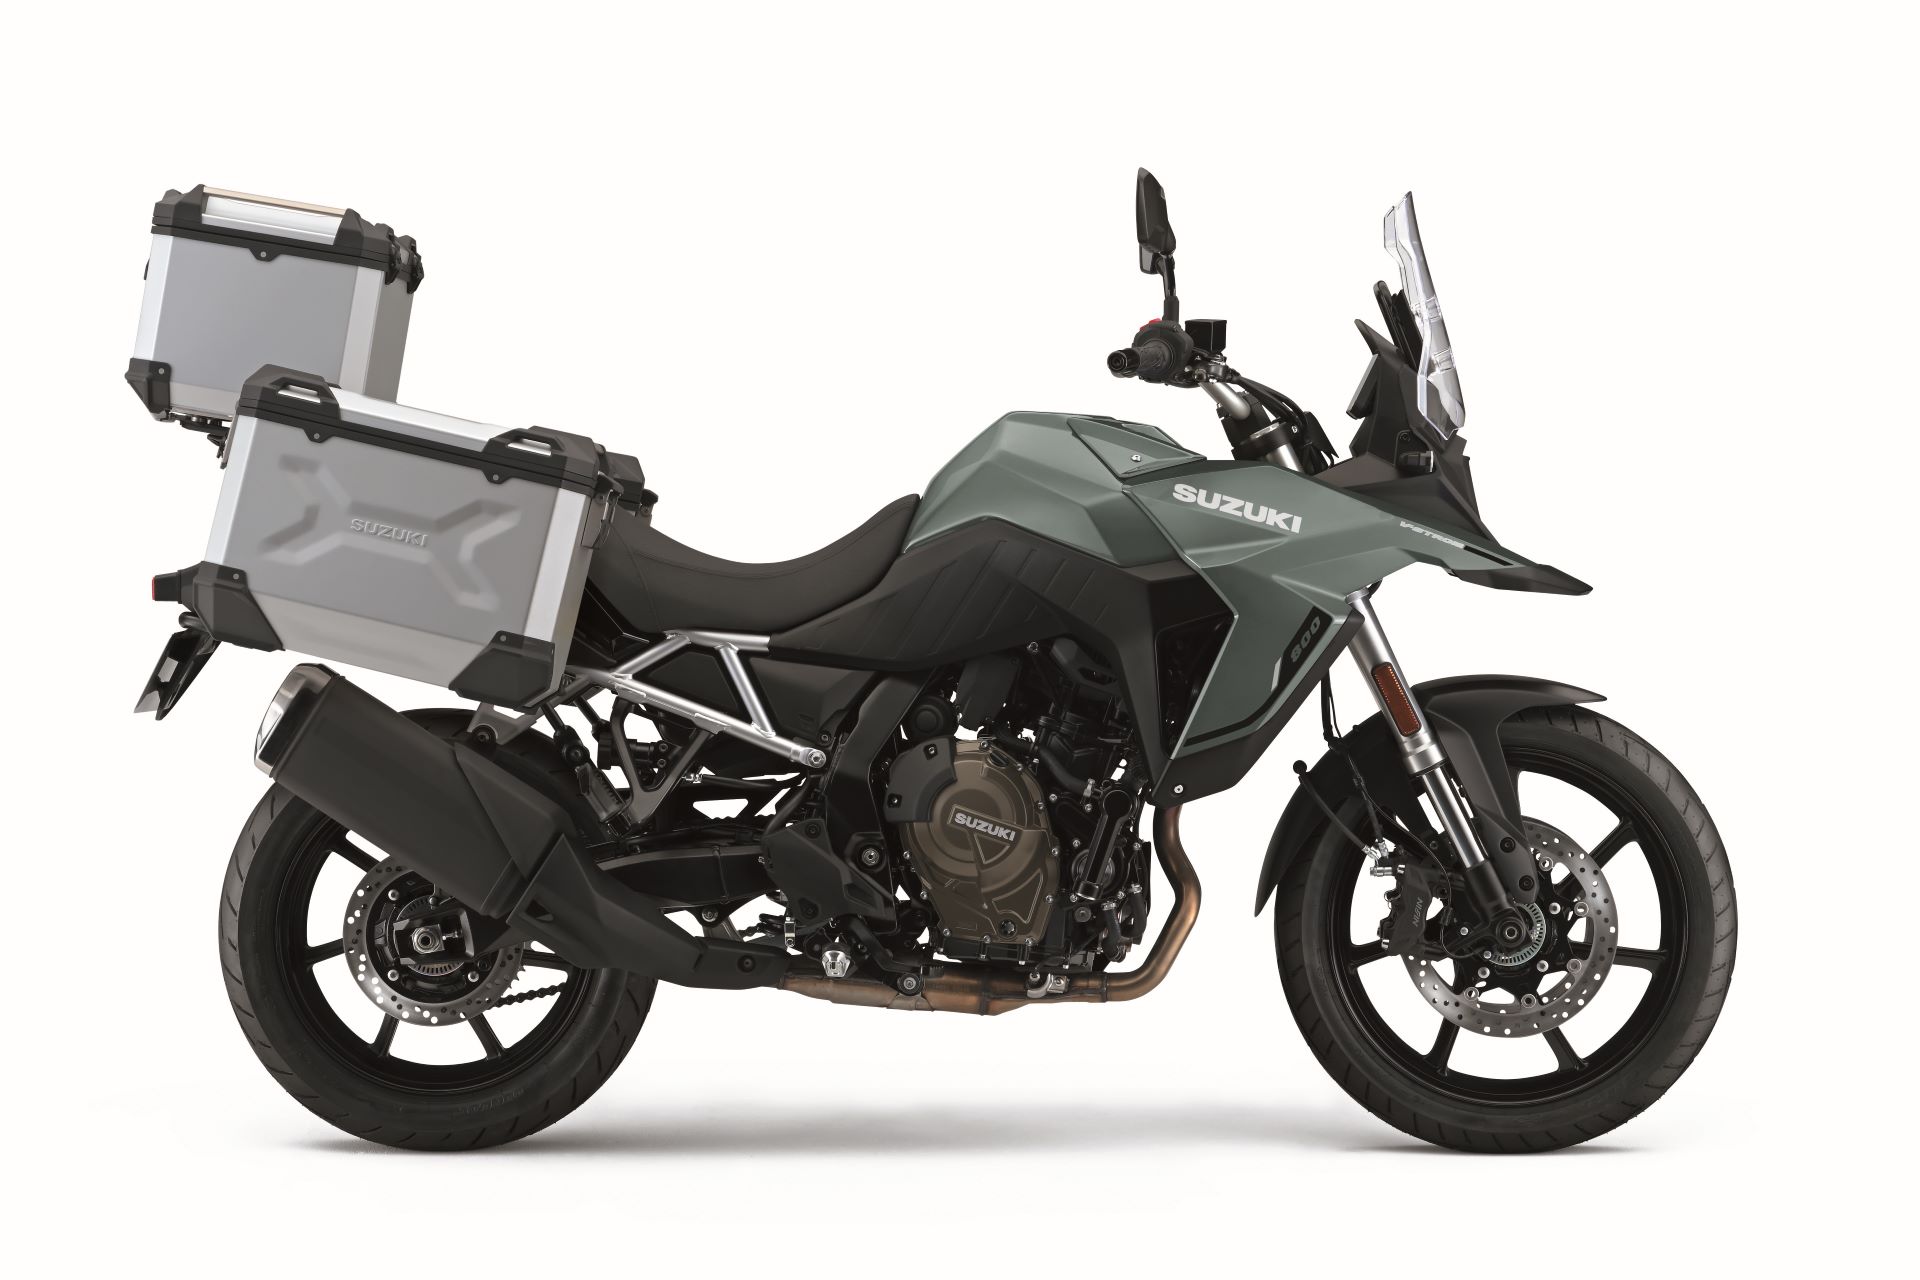 Suzuki Expands Its Range with the New V-Strom 800RE Tour Model